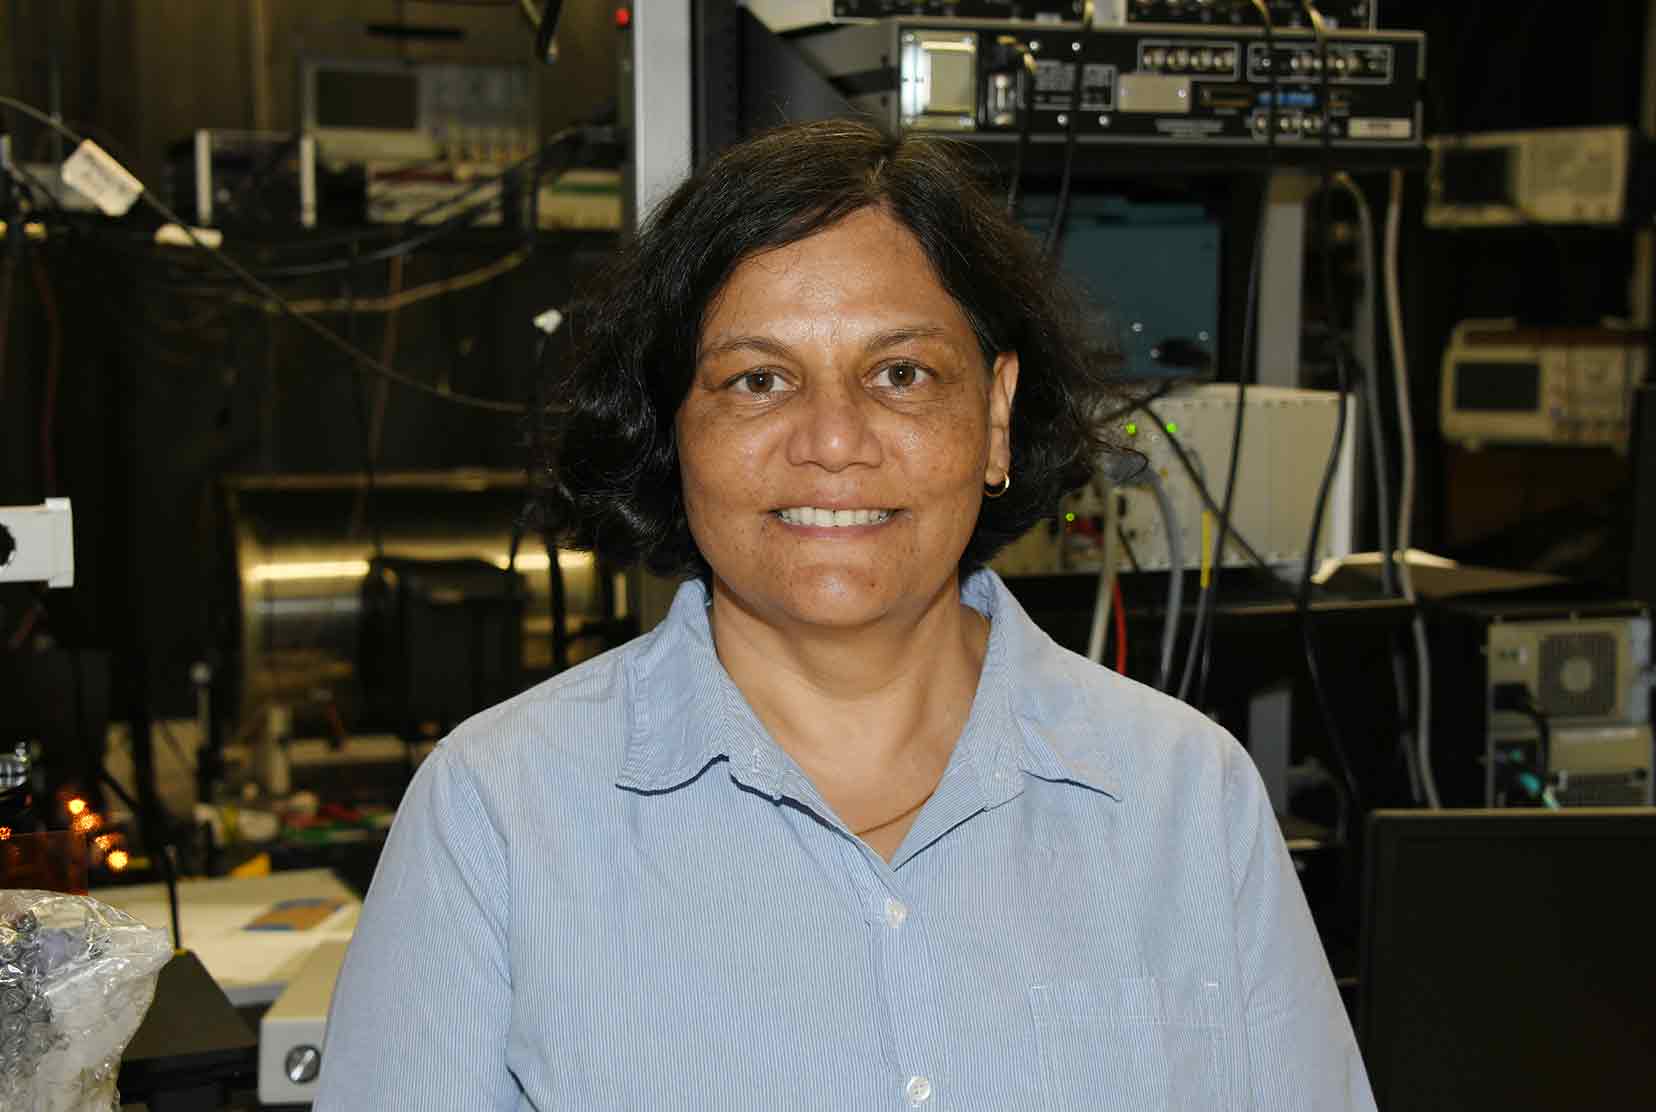 Dr. Renu Tripathi, Professor of Physics and Engineering, has been named as the recipient of the $100,000 IBM SPIE HBCU Faculty Accelerator Award in Quantum Optics and Photonics.